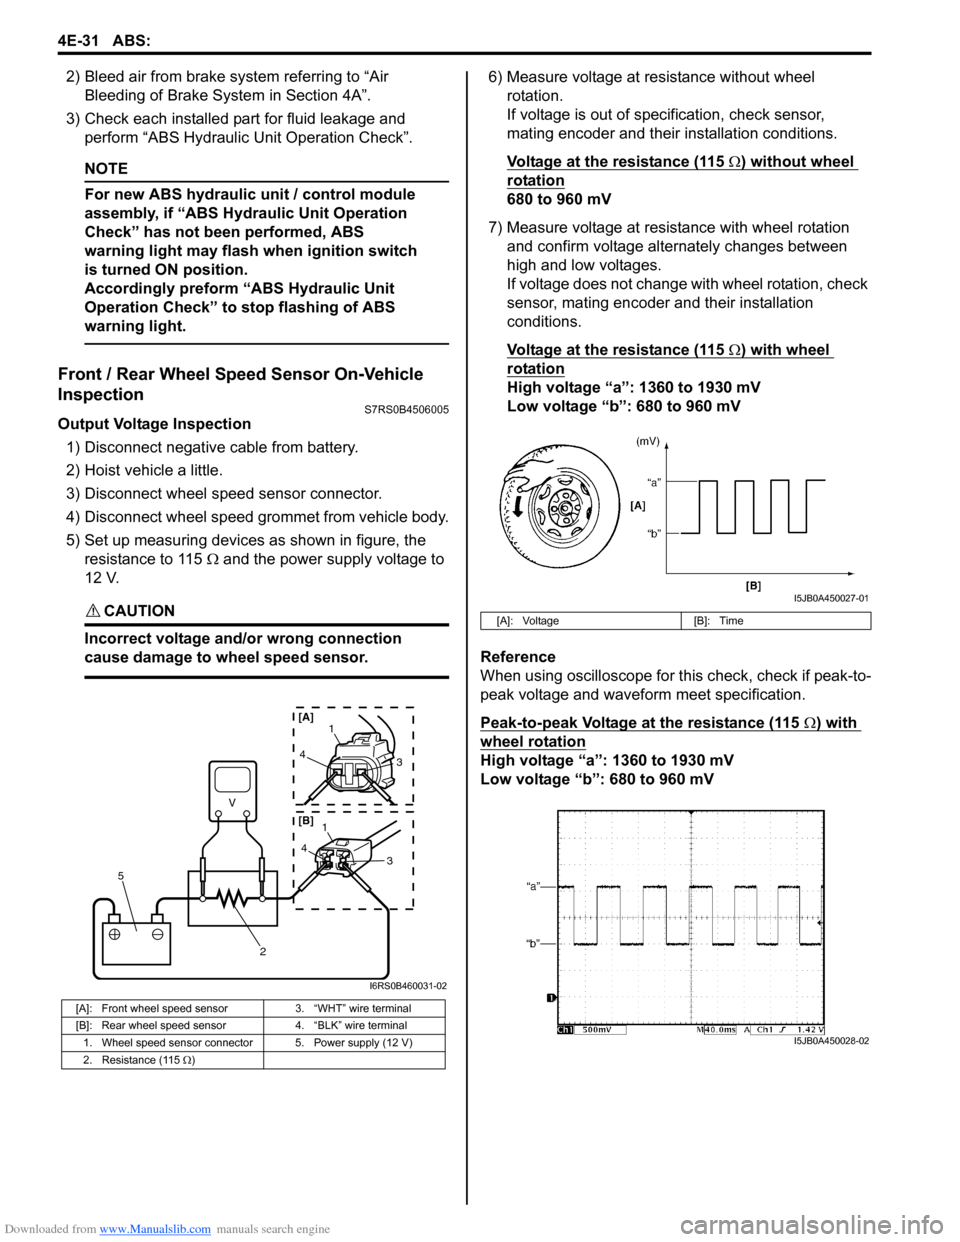 SUZUKI SWIFT 2008 2.G Service Service Manual Downloaded from www.Manualslib.com manuals search engine 4E-31 ABS: 
2) Bleed air from brake system referring to “Air Bleeding of Brake System in Section 4A”.
3) Check each installed part for flui